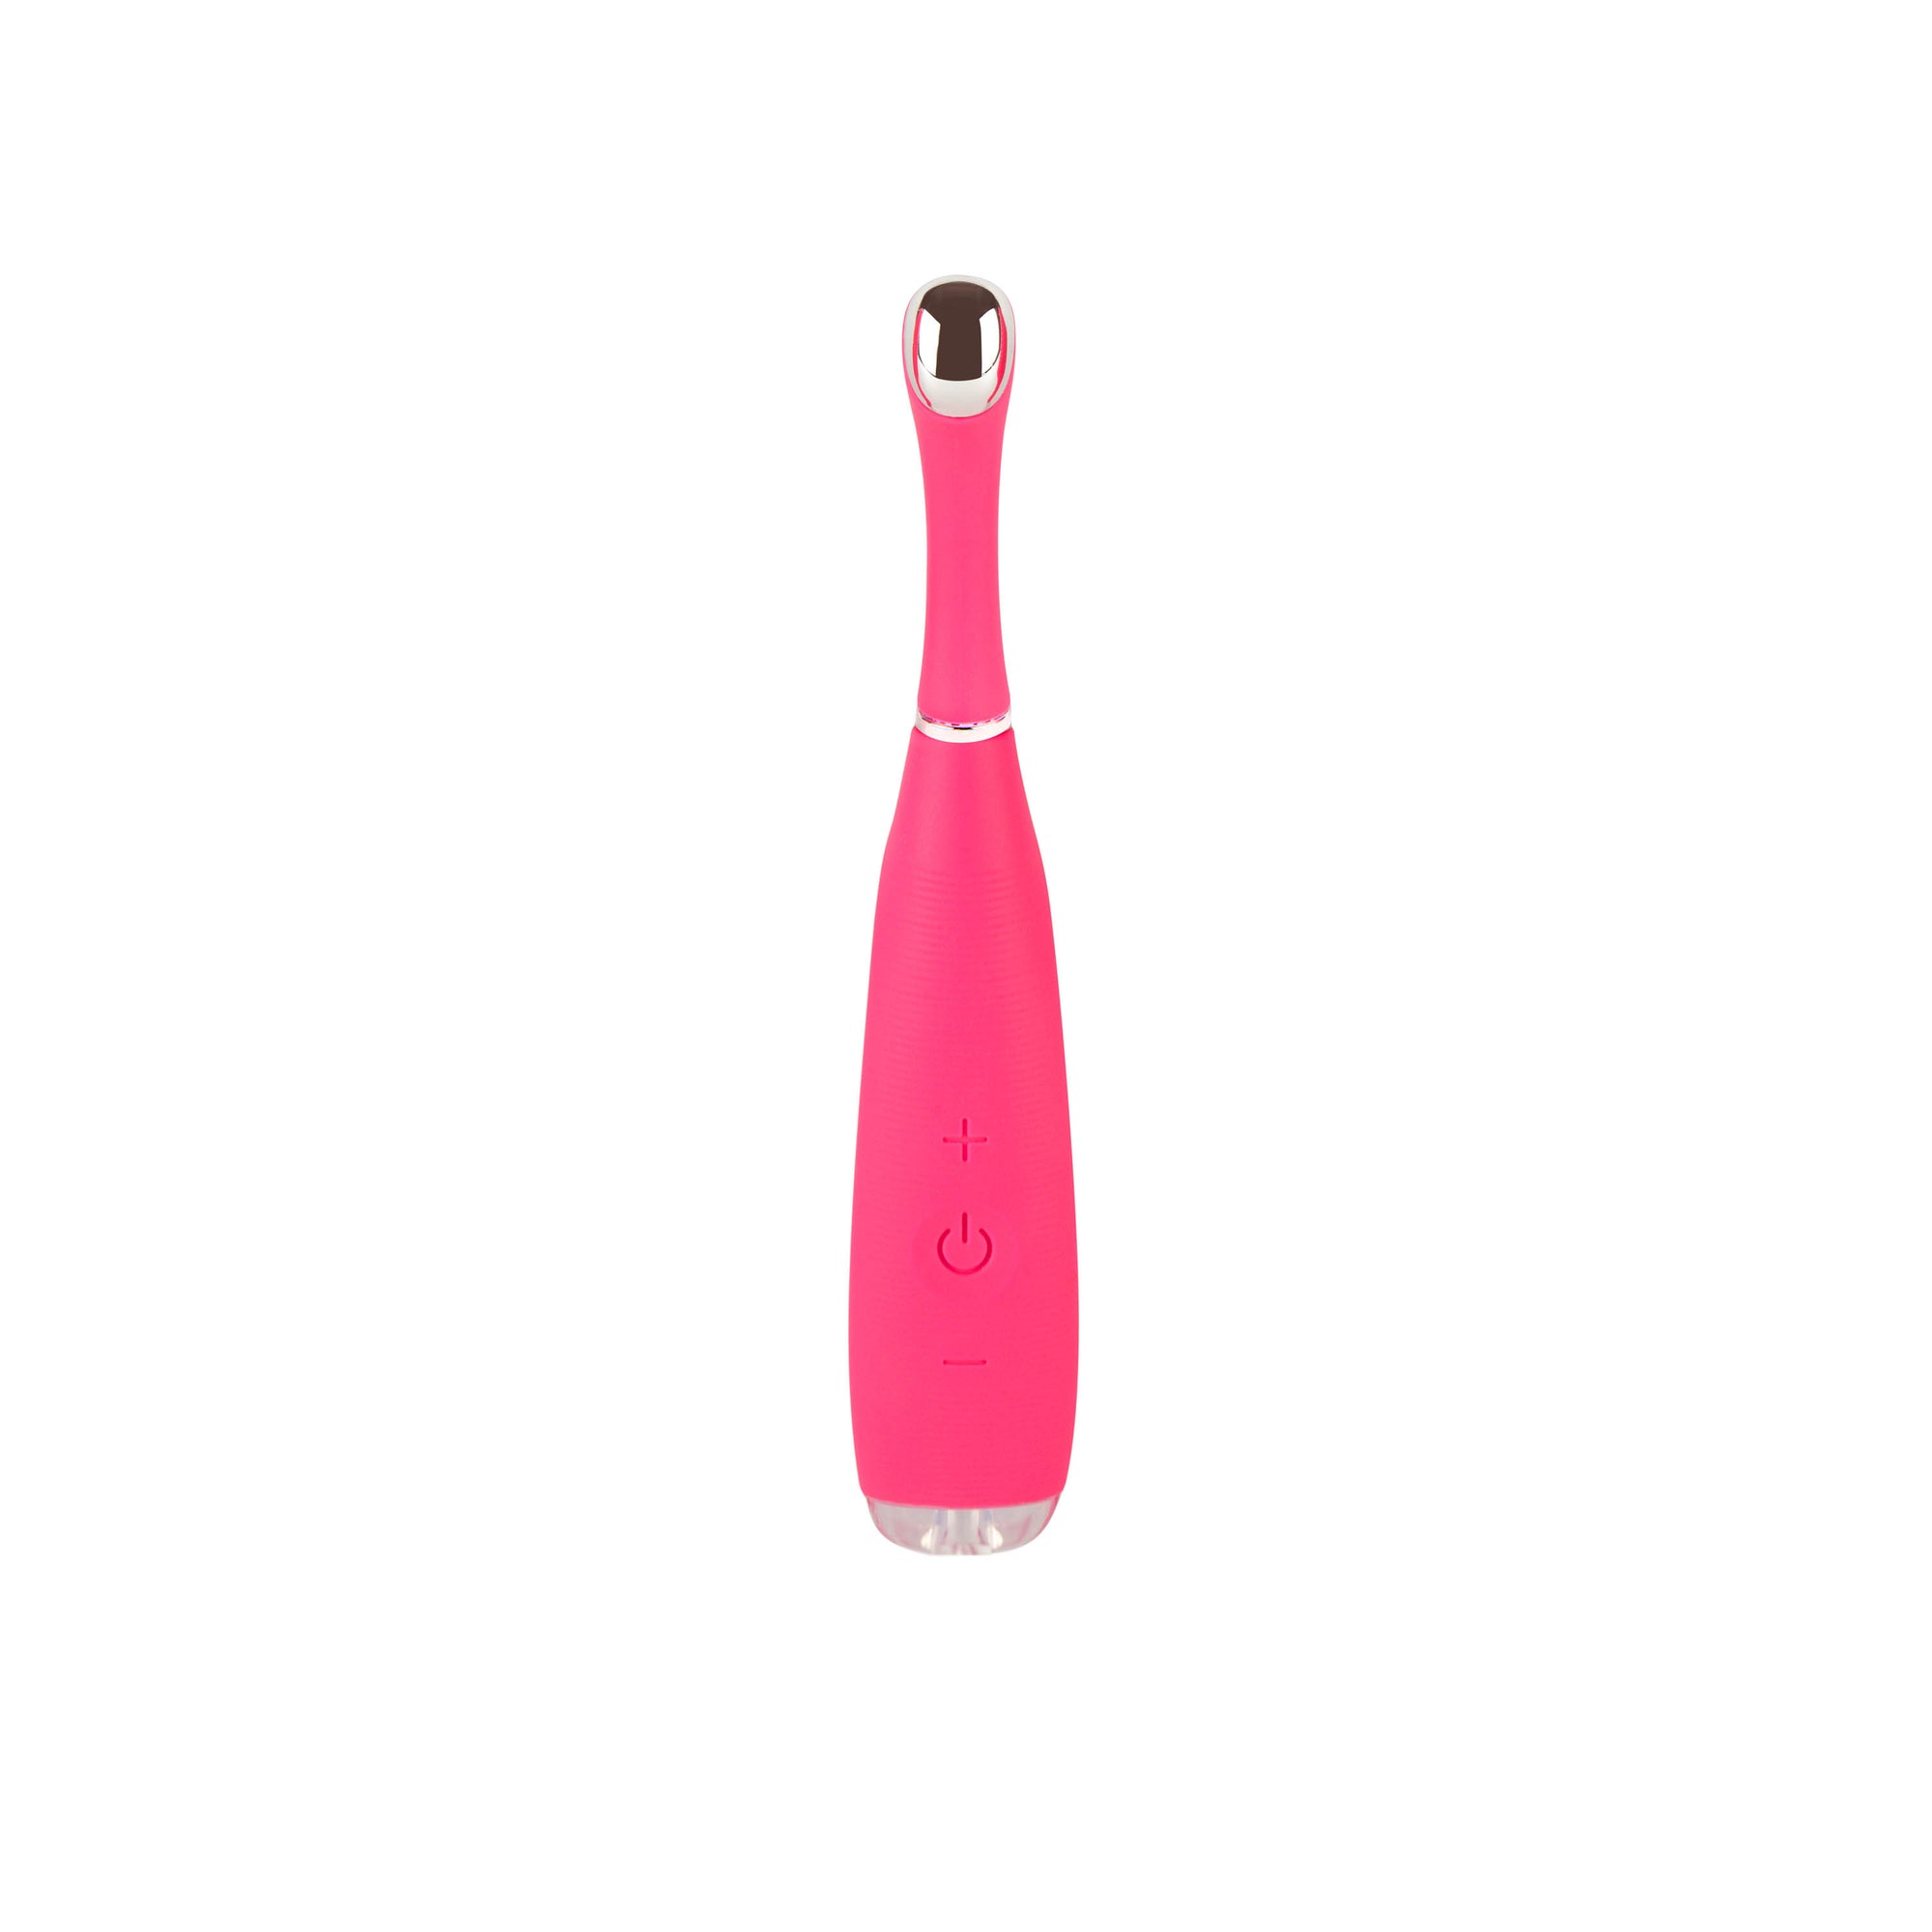 Sonicleanse pure glo with gentle eye massager attachment